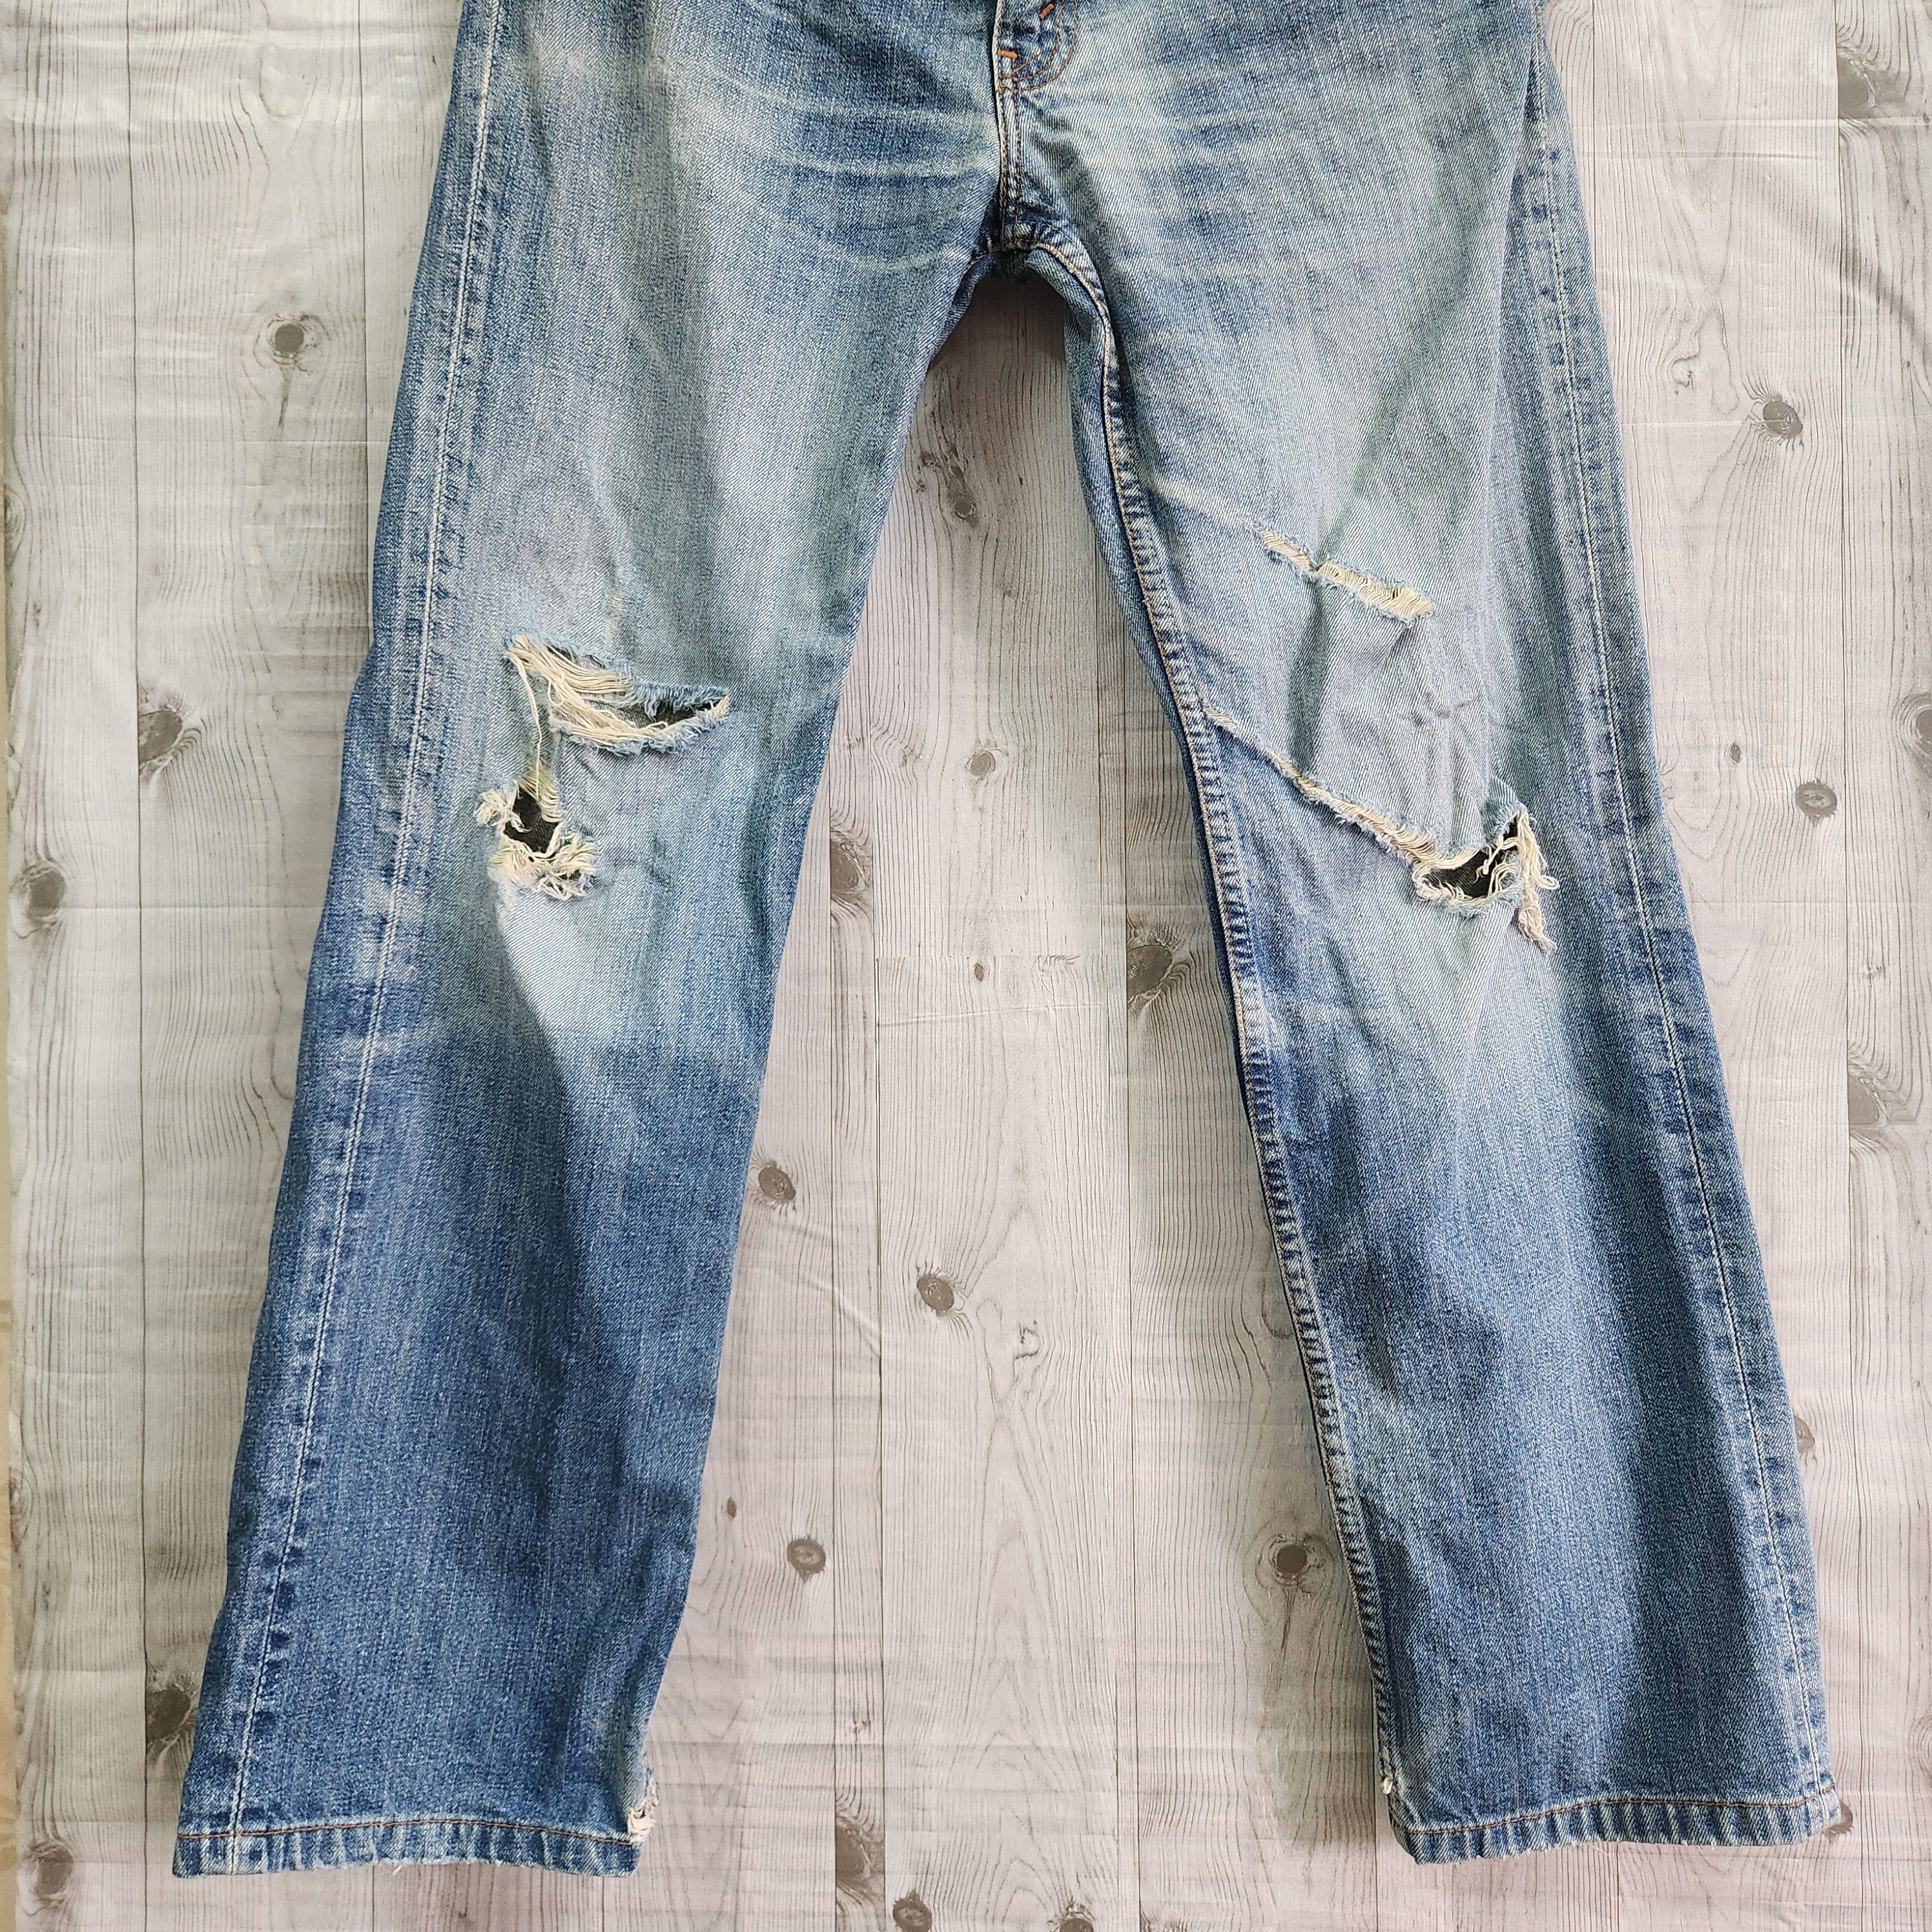 Levis 502 Vintage Distressed Ripped Denim Jeans Year 2002 - 20